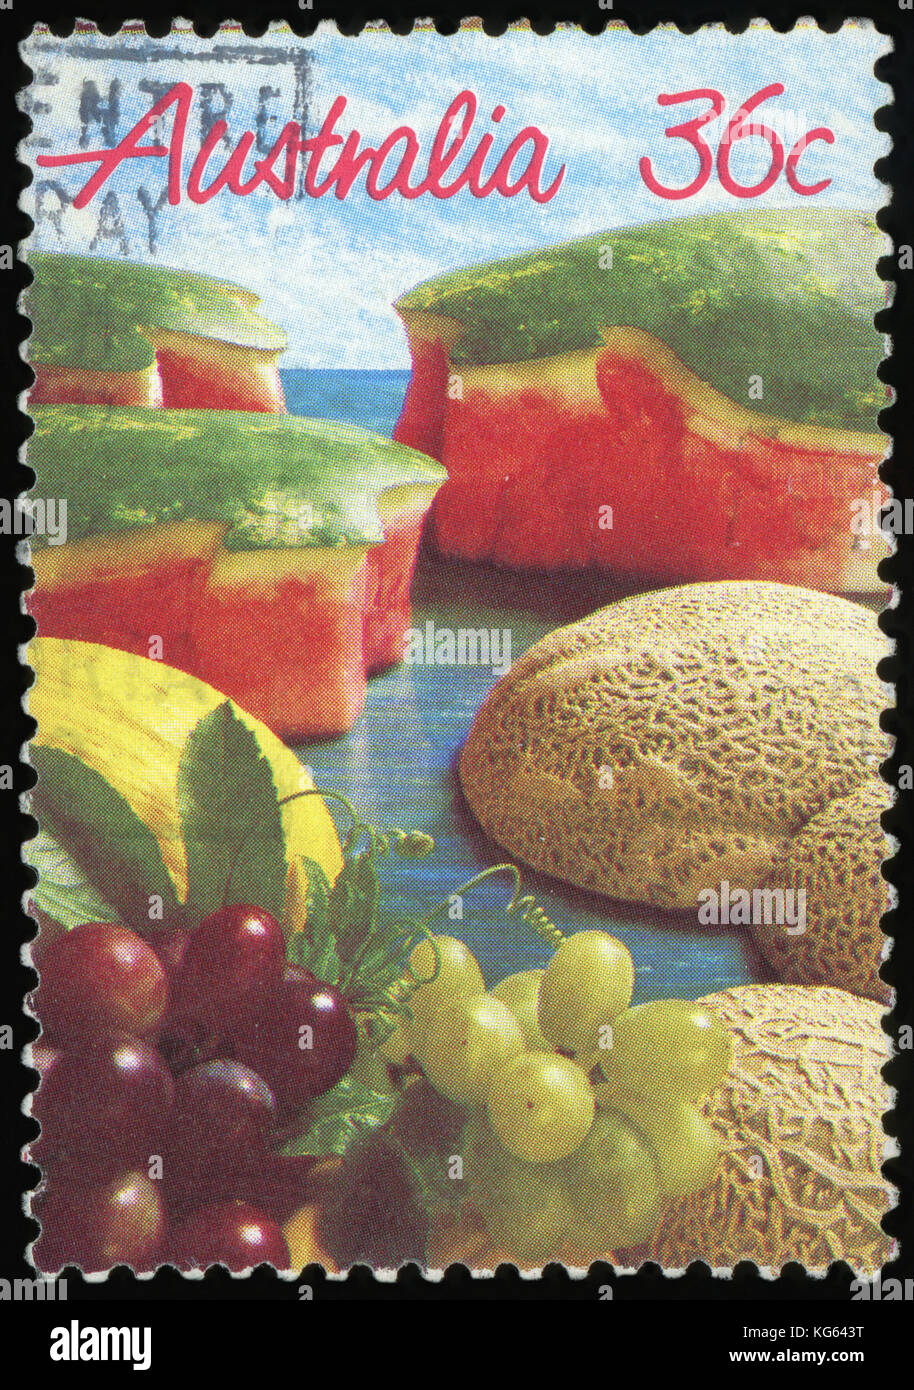 AUSTRALIA - CIRCA 1987: A stamp printed in Australia shows Grapes & Melons, Fruit series, 1987 Stock Photo